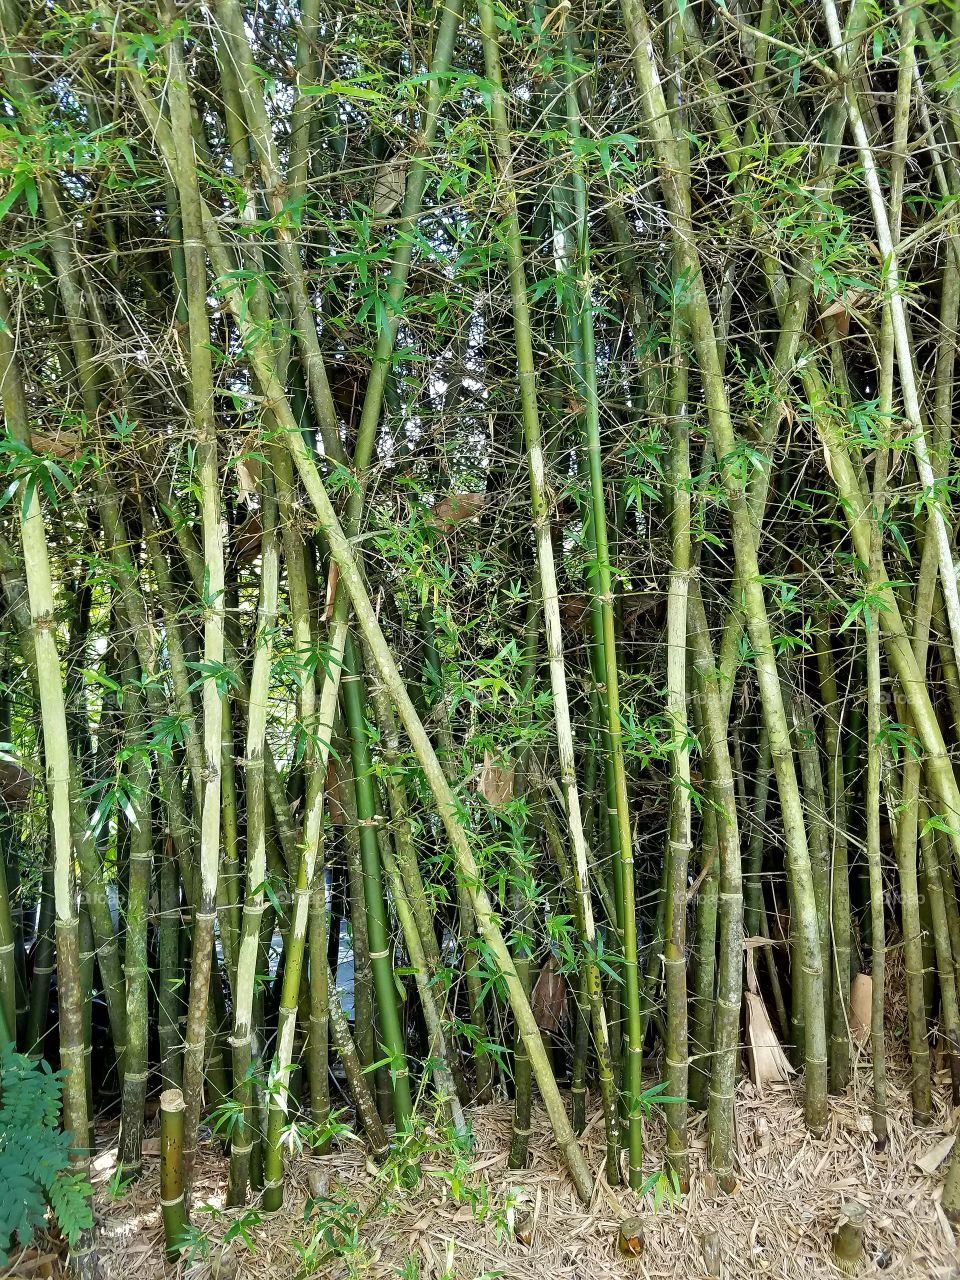 Lots of Bamboo or Cane